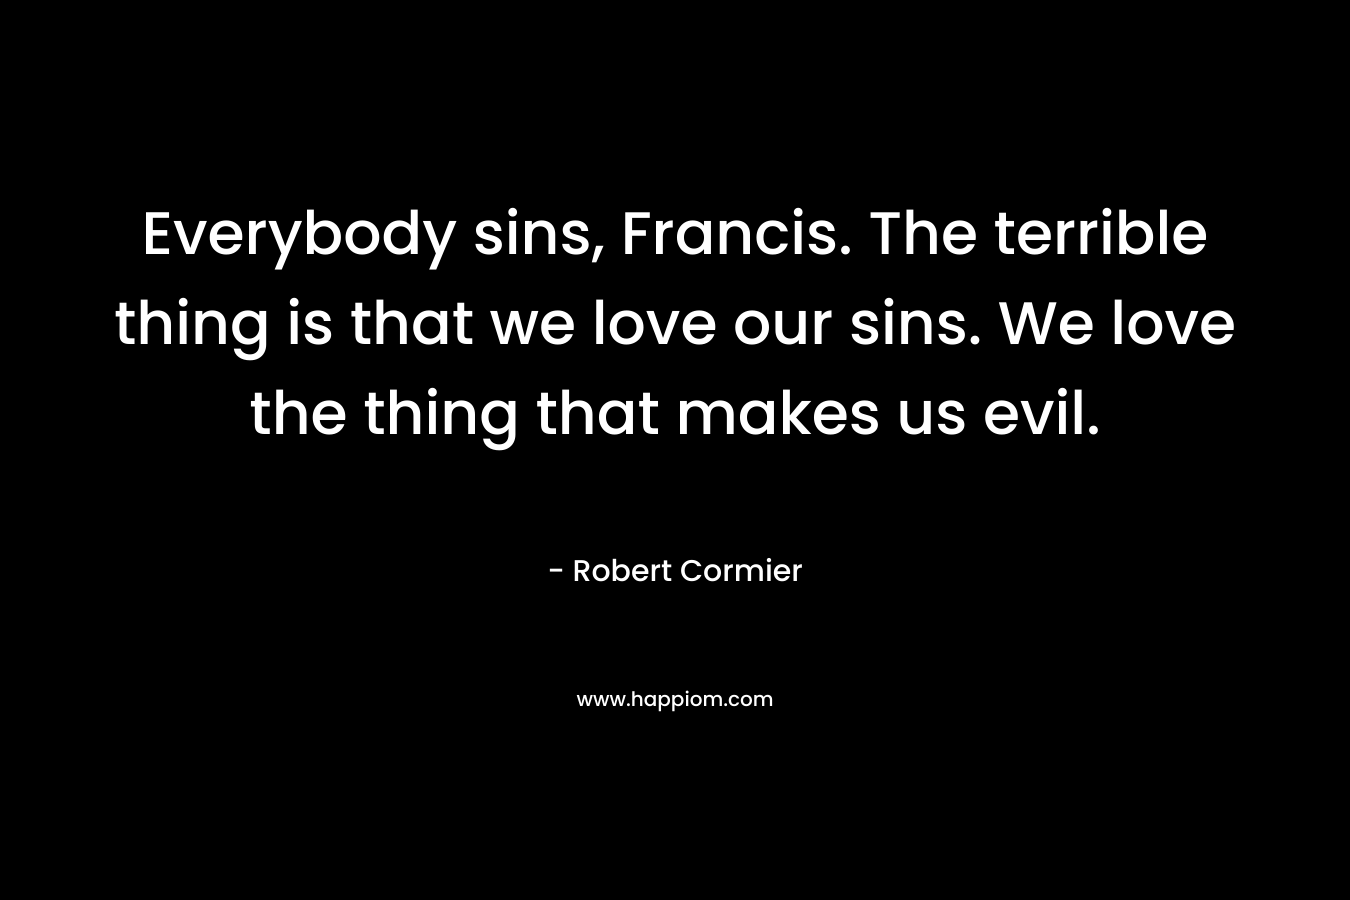 Everybody sins, Francis. The terrible thing is that we love our sins. We love the thing that makes us evil. – Robert Cormier